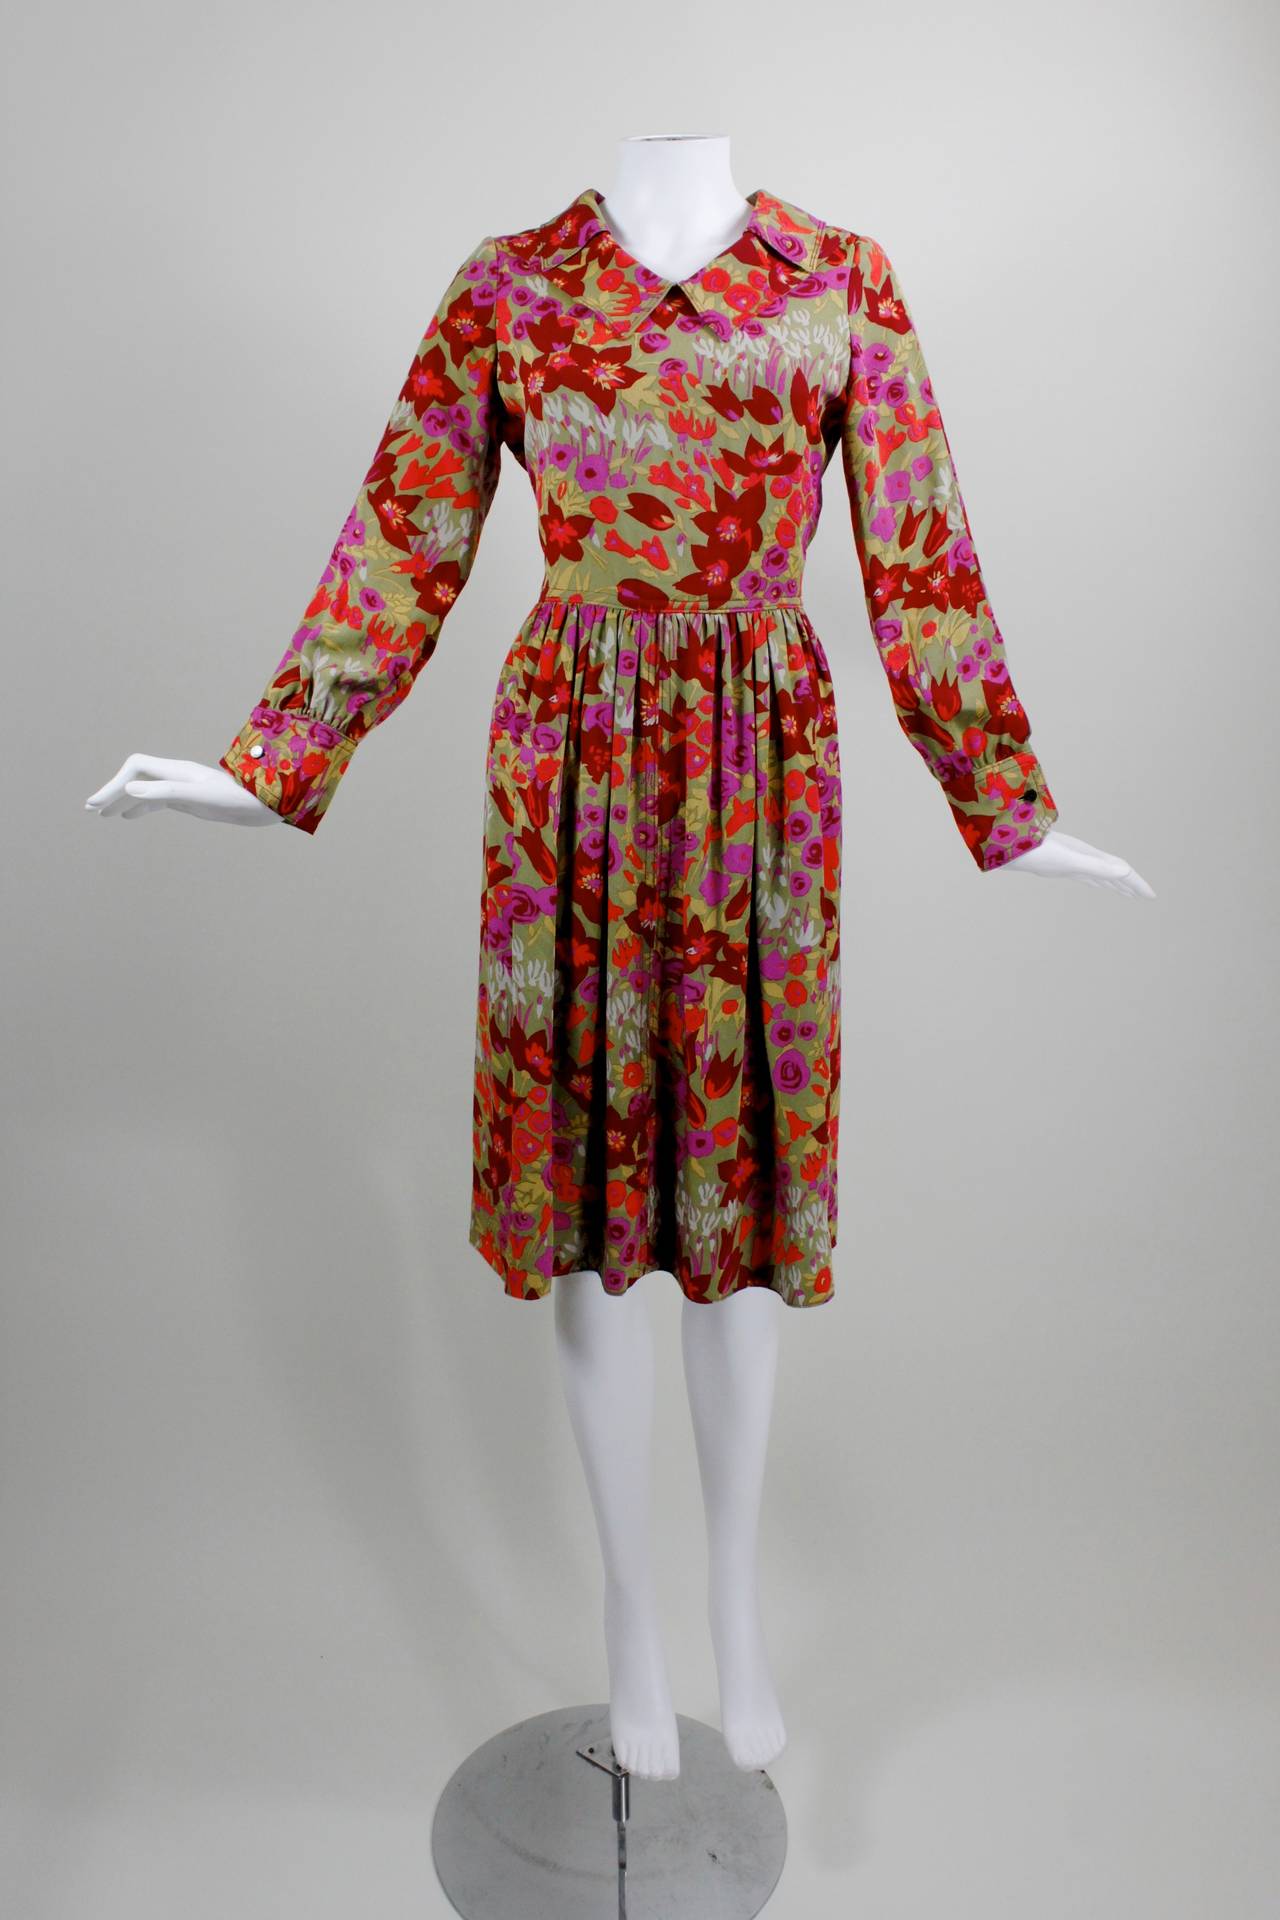 Galanos Multicolor Floral Pan Collar Dress

Measurements--
Bust: up to 38 inches
Waist: up to 30 inches
Hip: free
Length, Shoulder to Shoulder: 15 inches
Sleeve Length: 22 3/4 inches
Length, Center Back to Hem: 39 inches